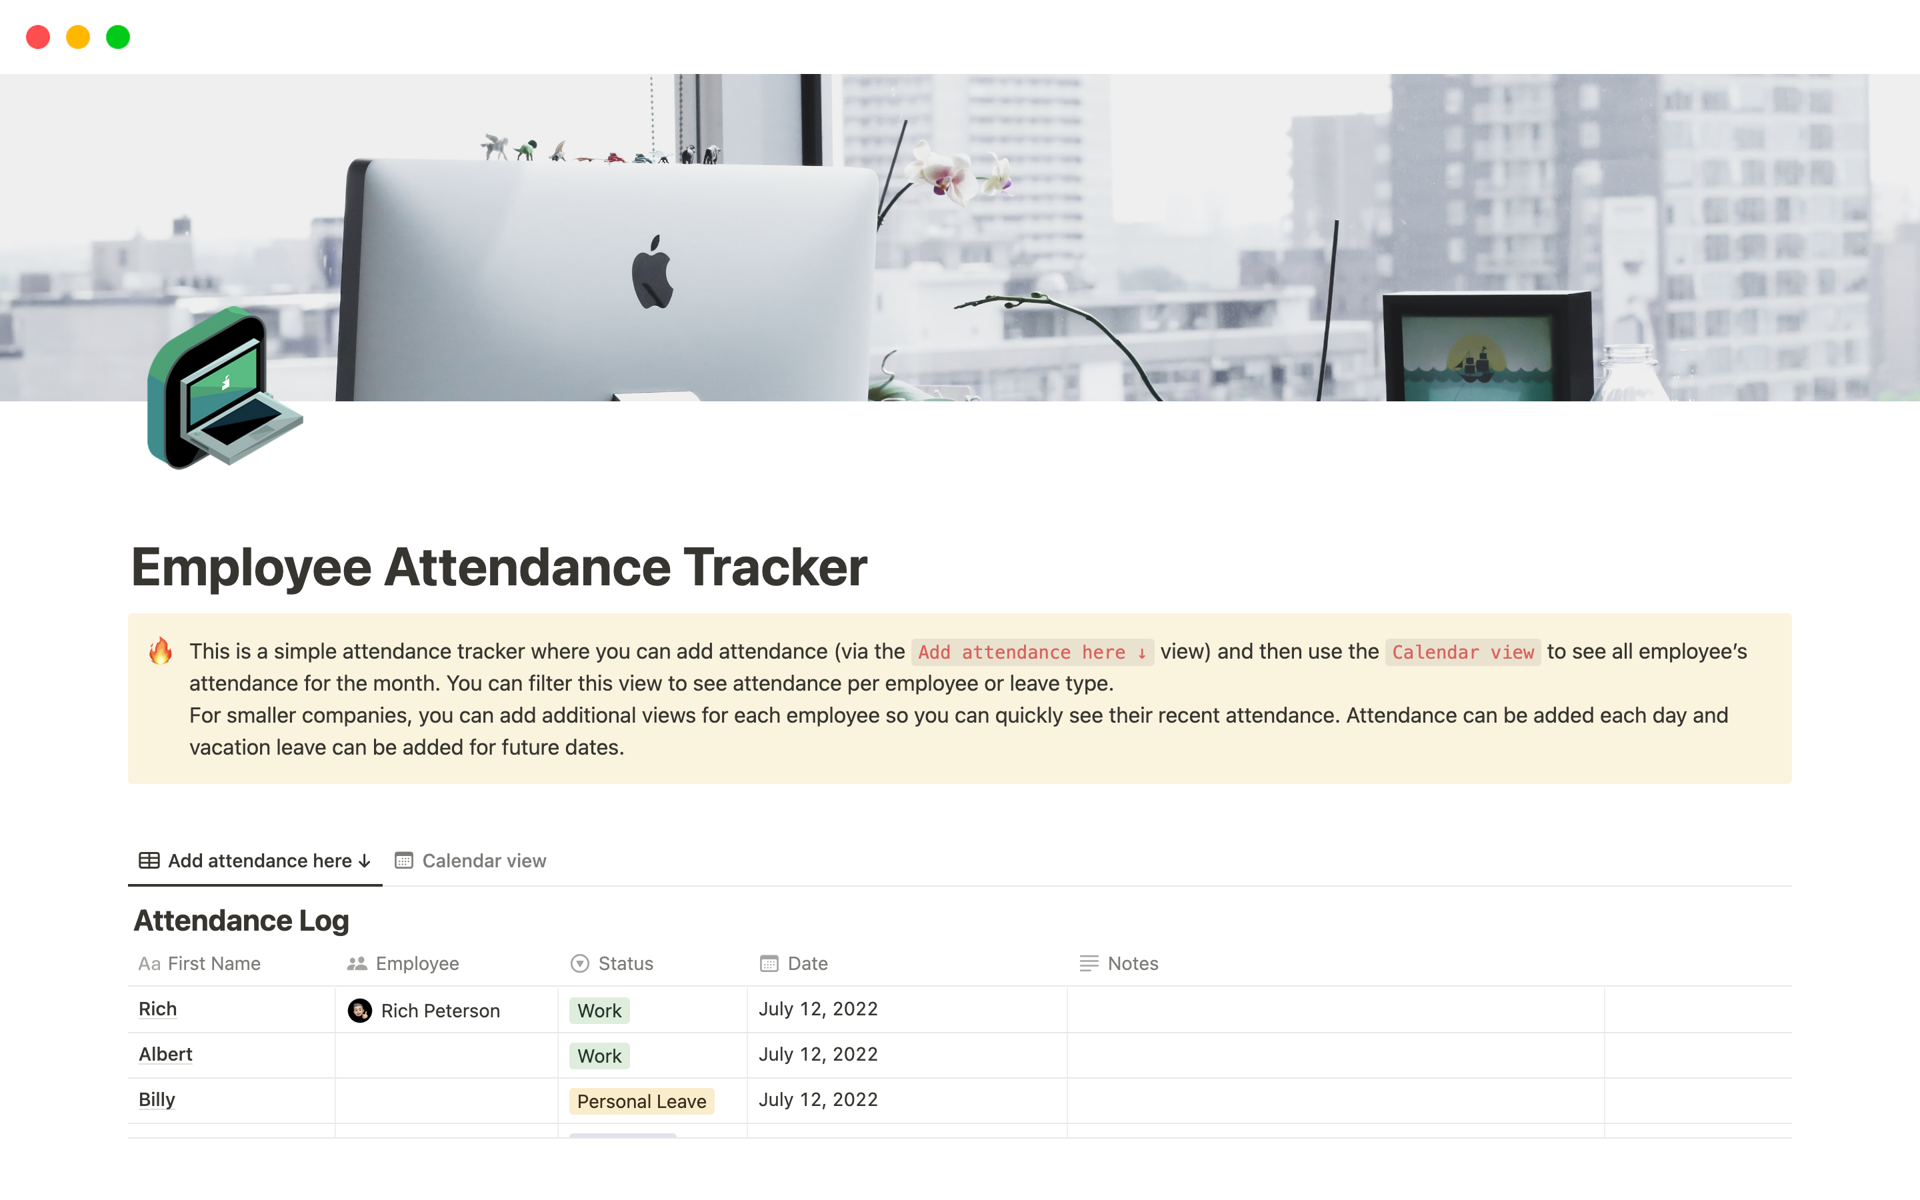 Use this simple employee attendance tracker template to document whether each employee worked, took vacation leave or needed personal or sick leave.